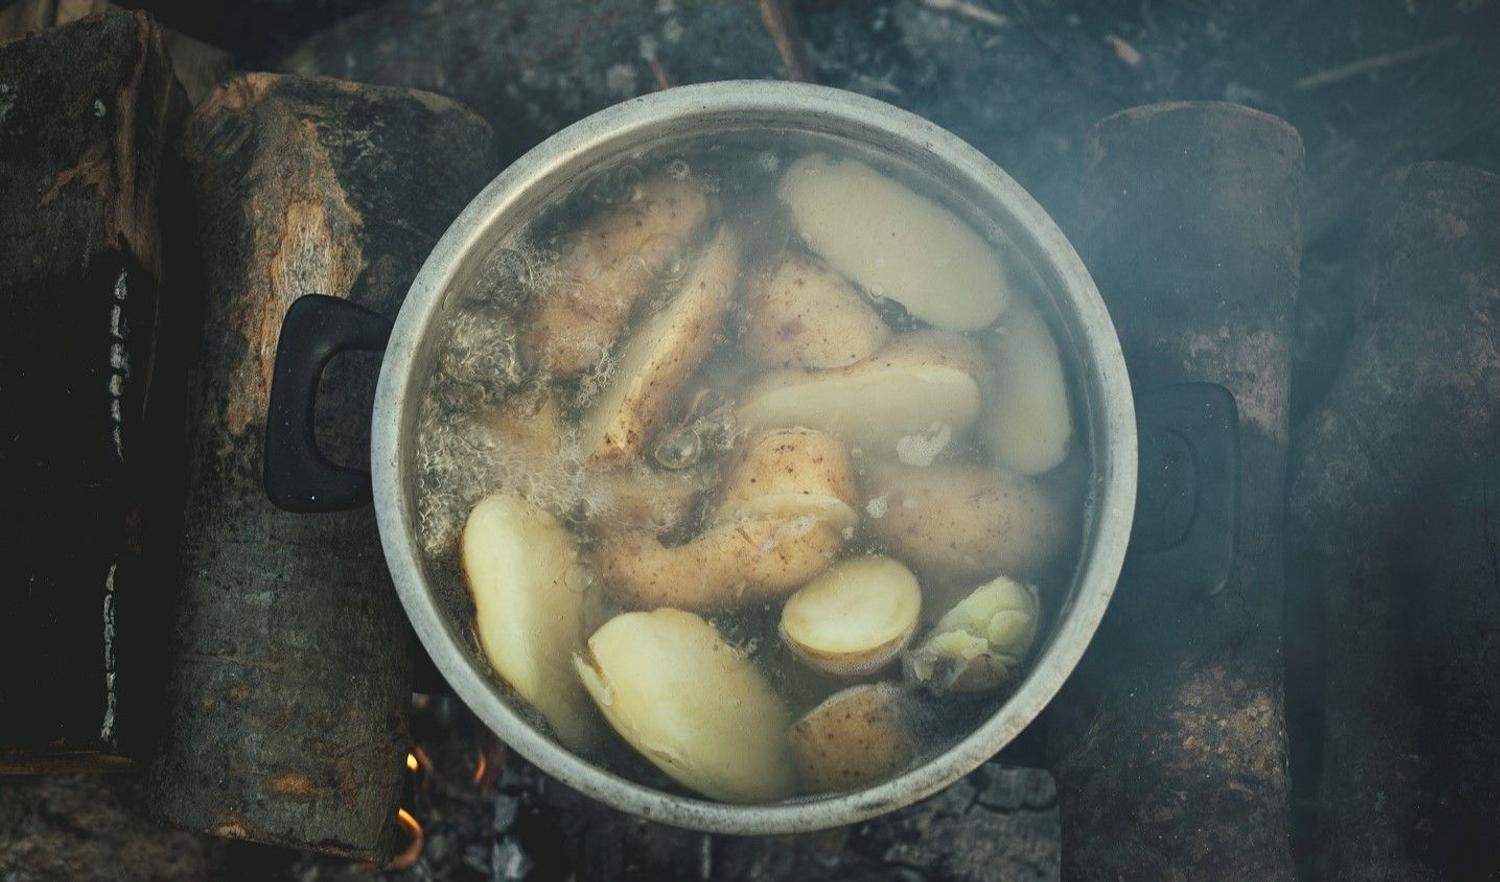 Boiling Potatoes in a pot on a wooden fireplace in Idomeni